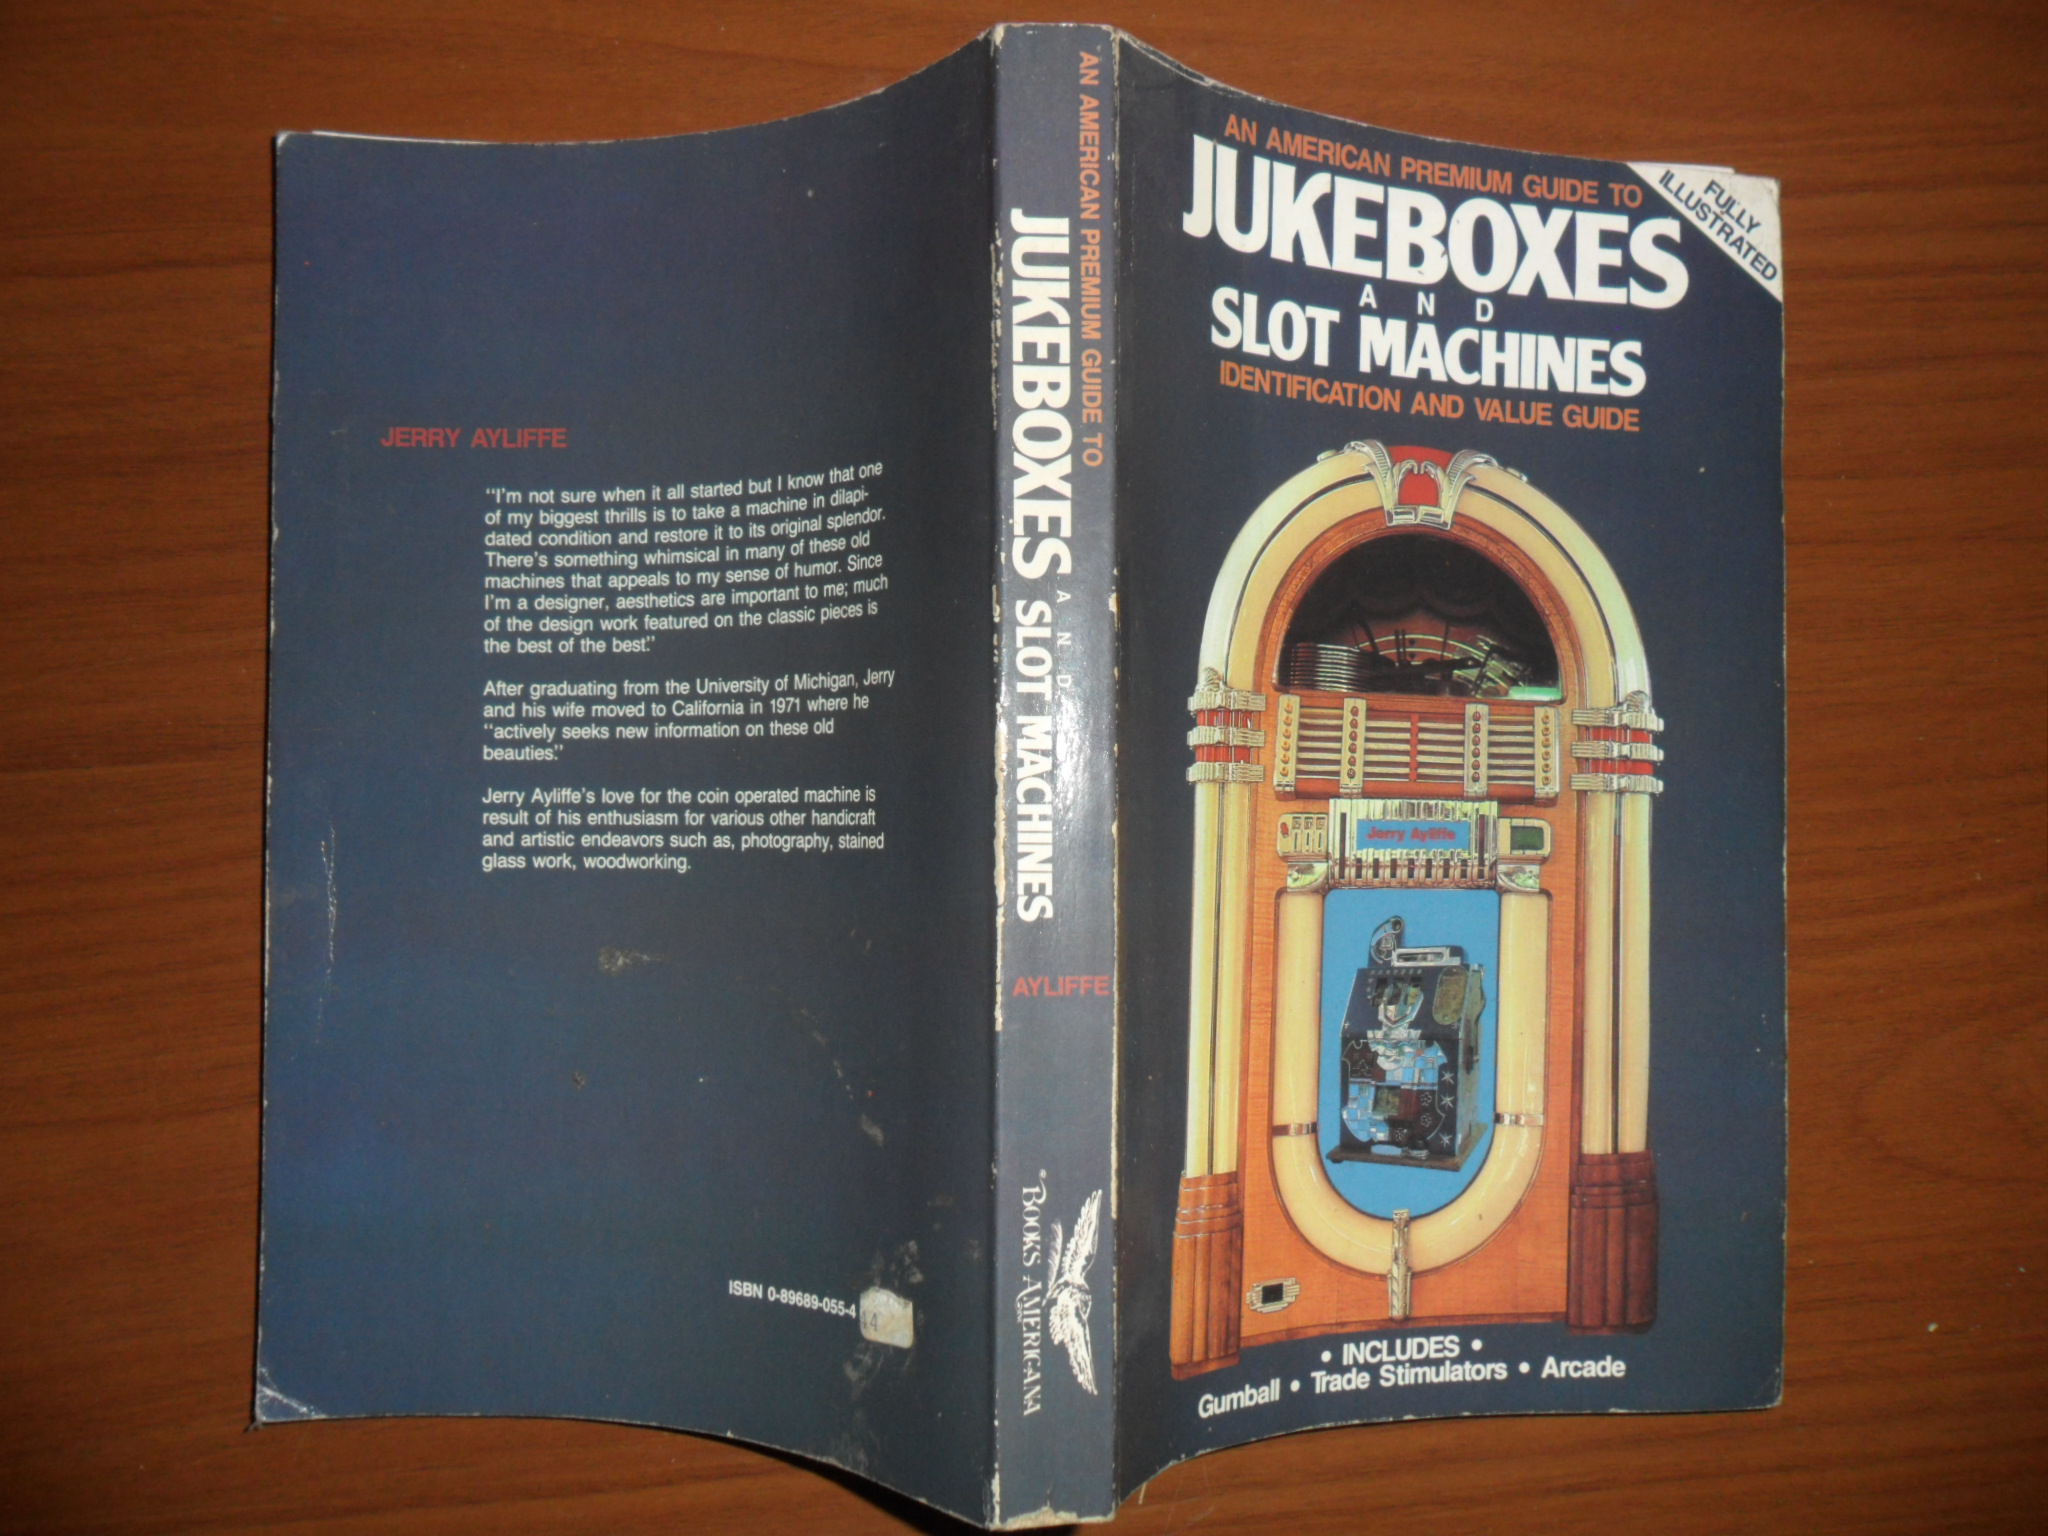 an american premium guide to Jukeboxes and slot machines